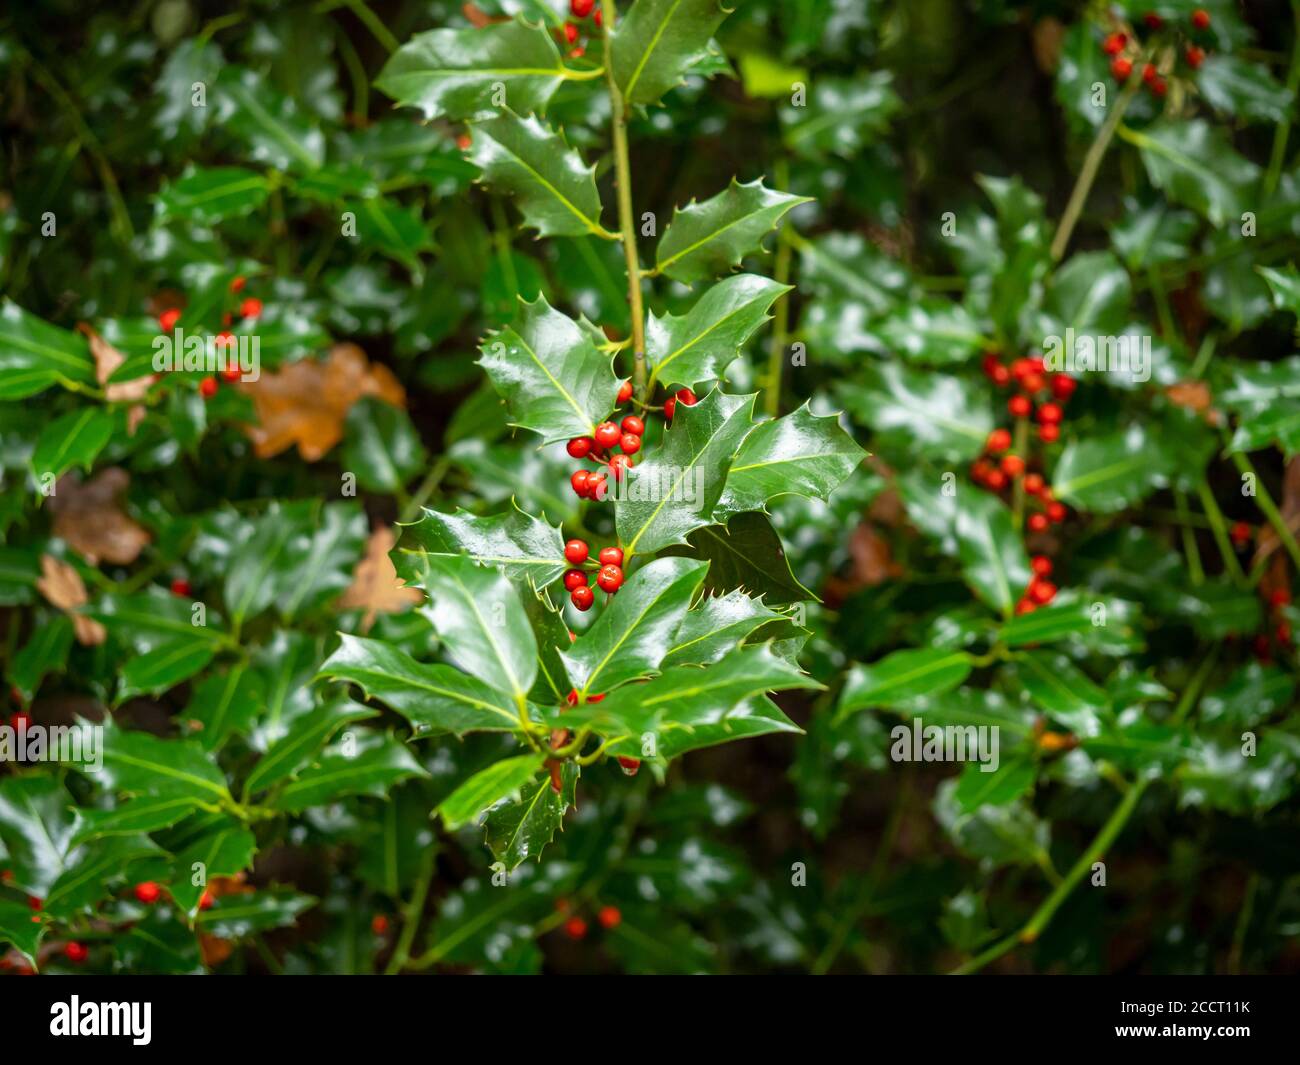 Holly bush, Ilex, with shiny green leaves and red berries Stock Photo